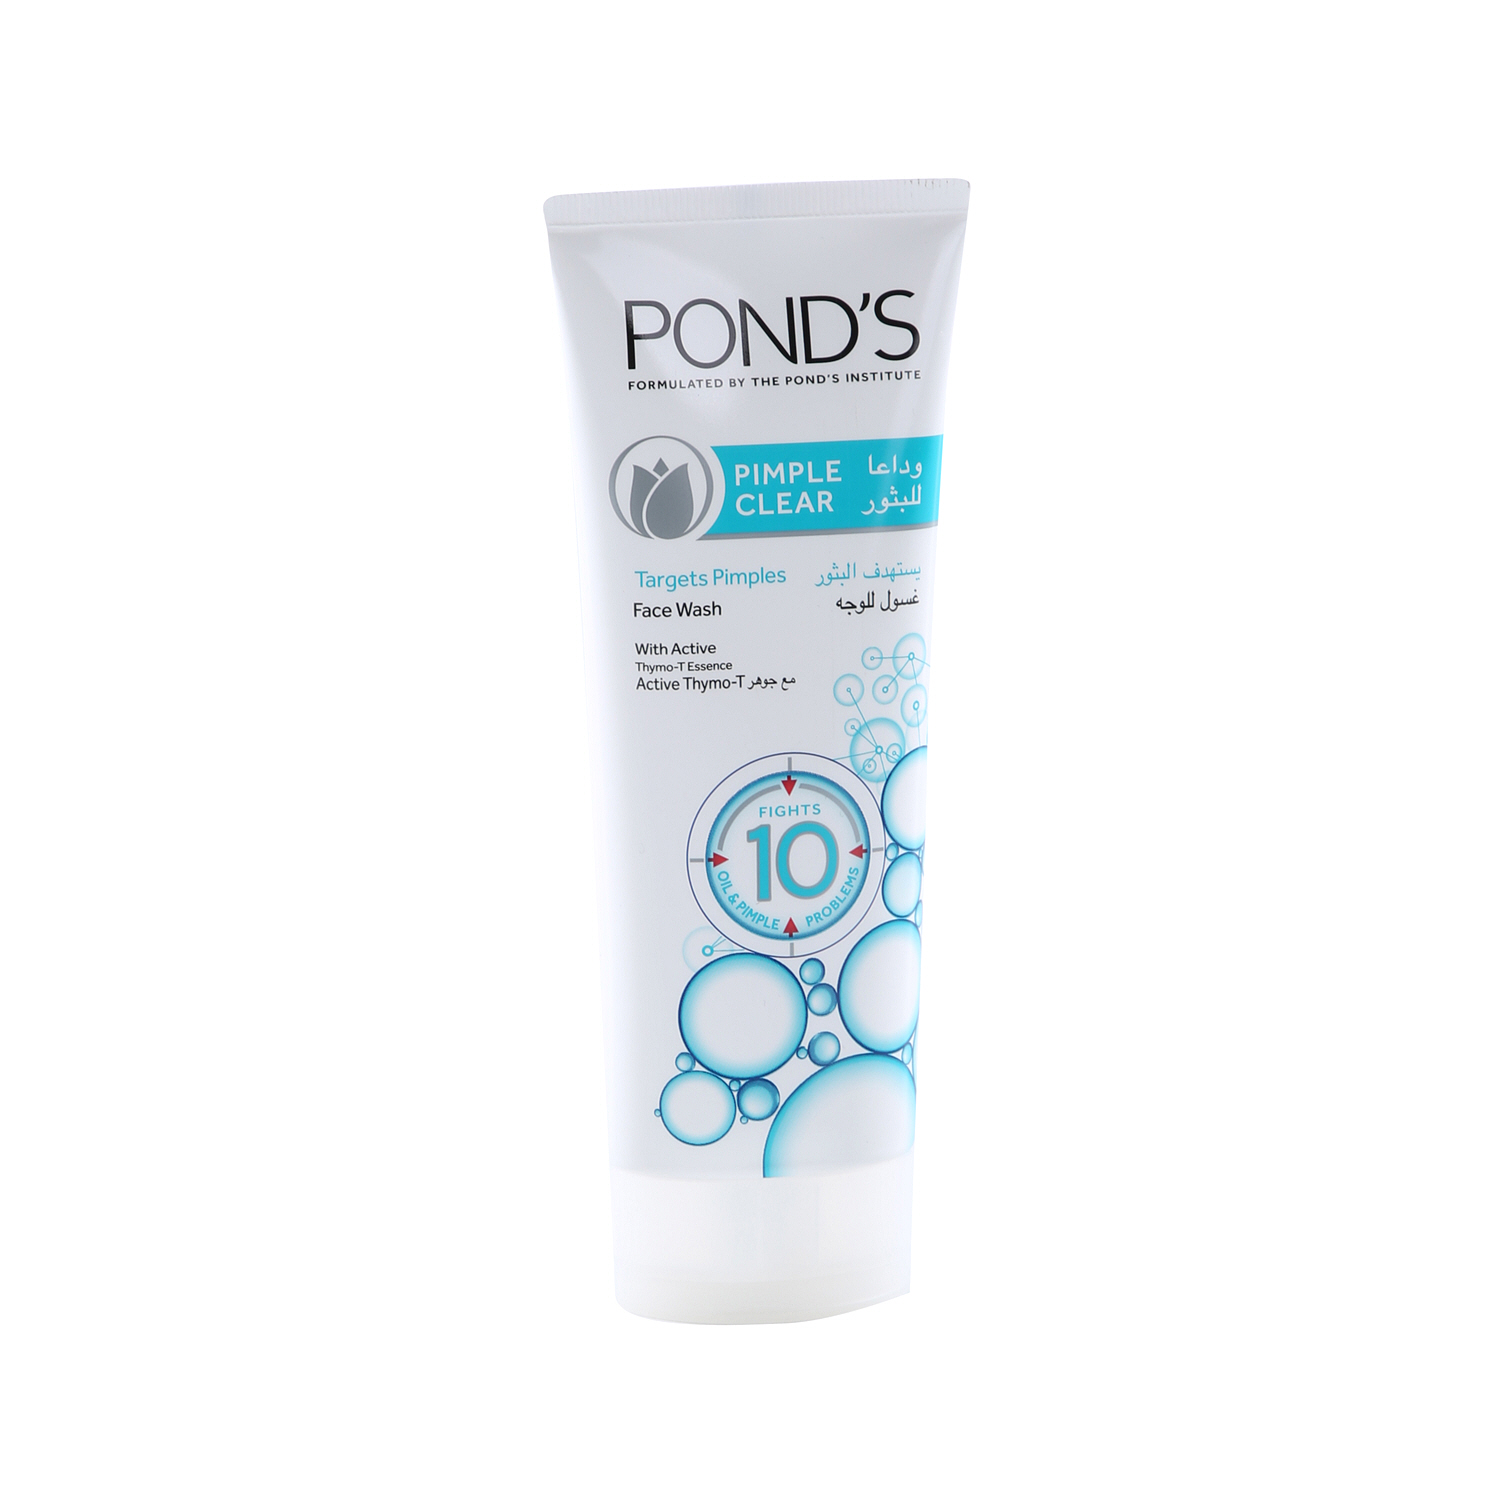 Pond's Multi Action Facial Foam And Scrub 100 ml